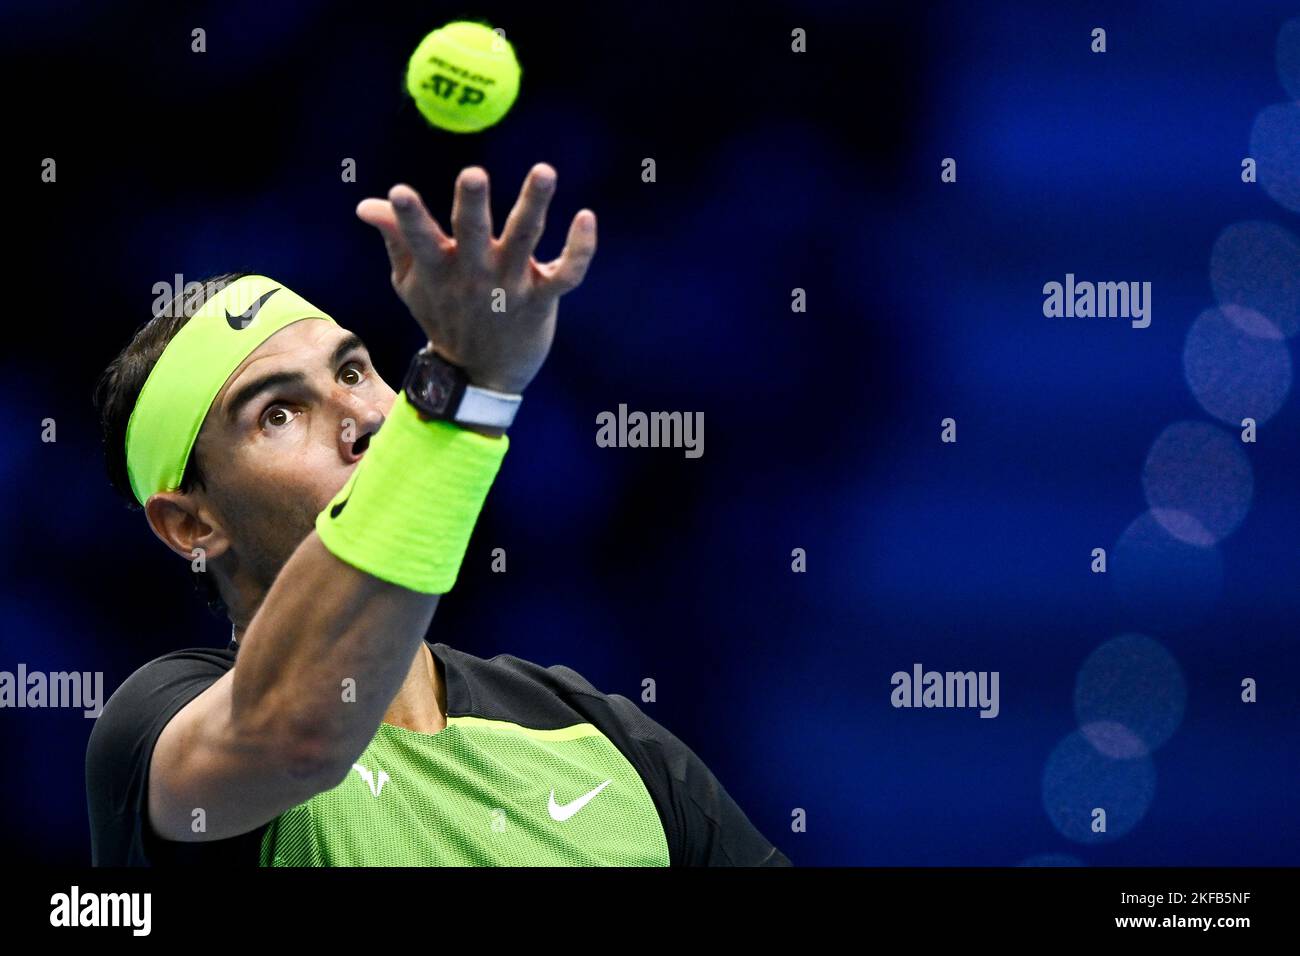 Turin, Italy. 17 November 2022. Rafael Nadal of Spain serves during his round robin match against Casper Ruud of Norway during day five of the Nitto ATP Finals. Rafael Nadal won the match 7-5, 7-5. Credit: Nicolò Campo/Alamy Live News Stock Photo